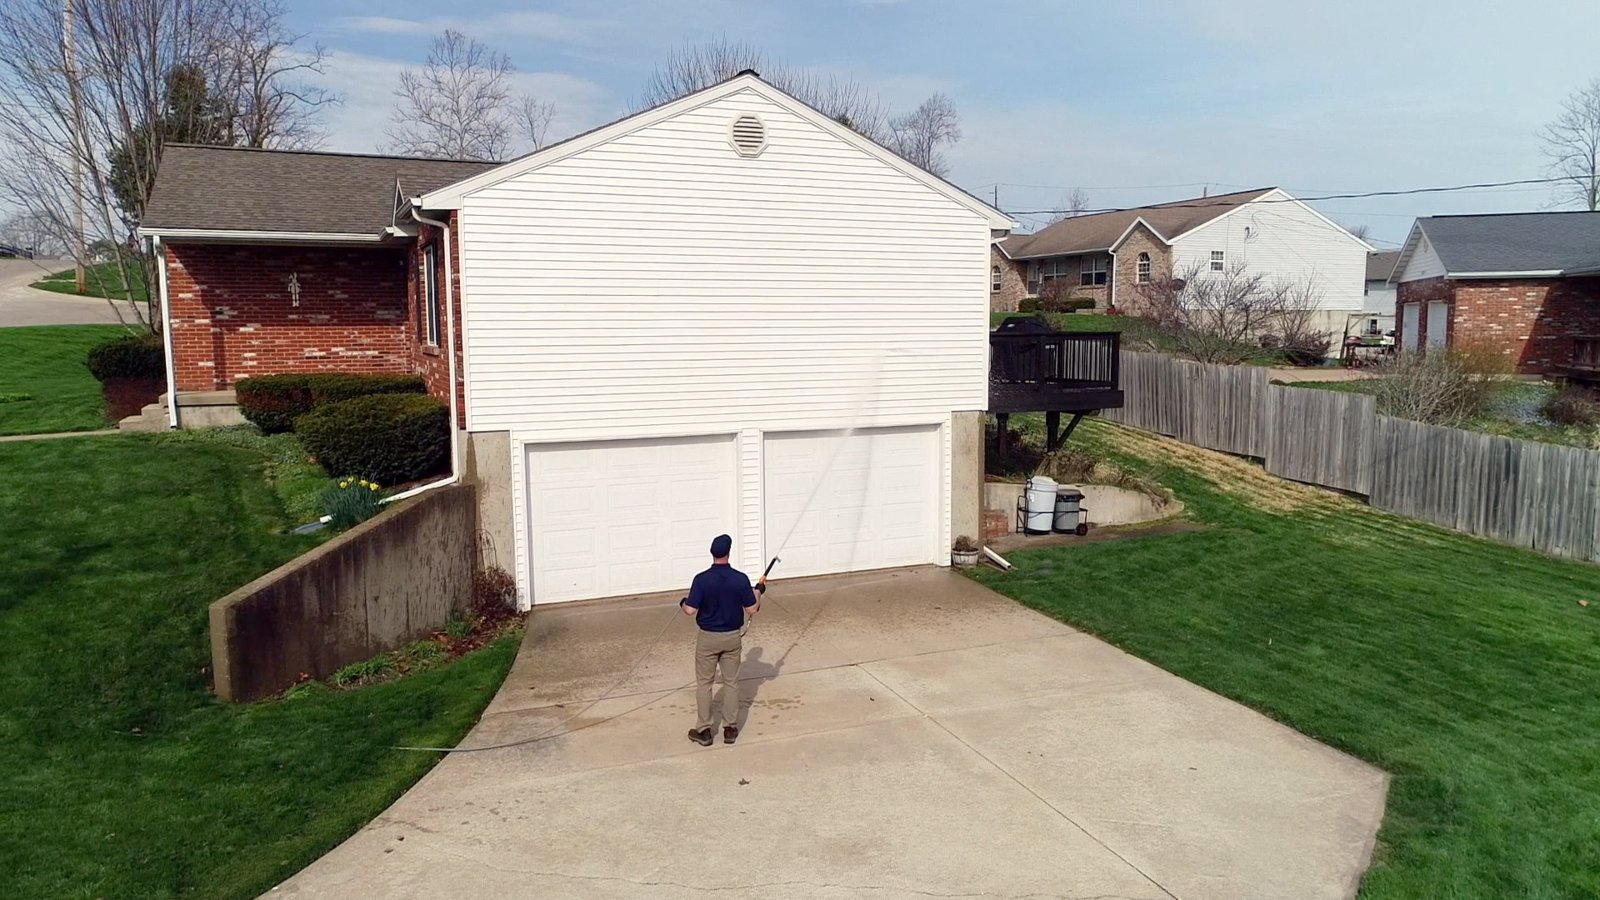 House & Driveway Cleaning Service